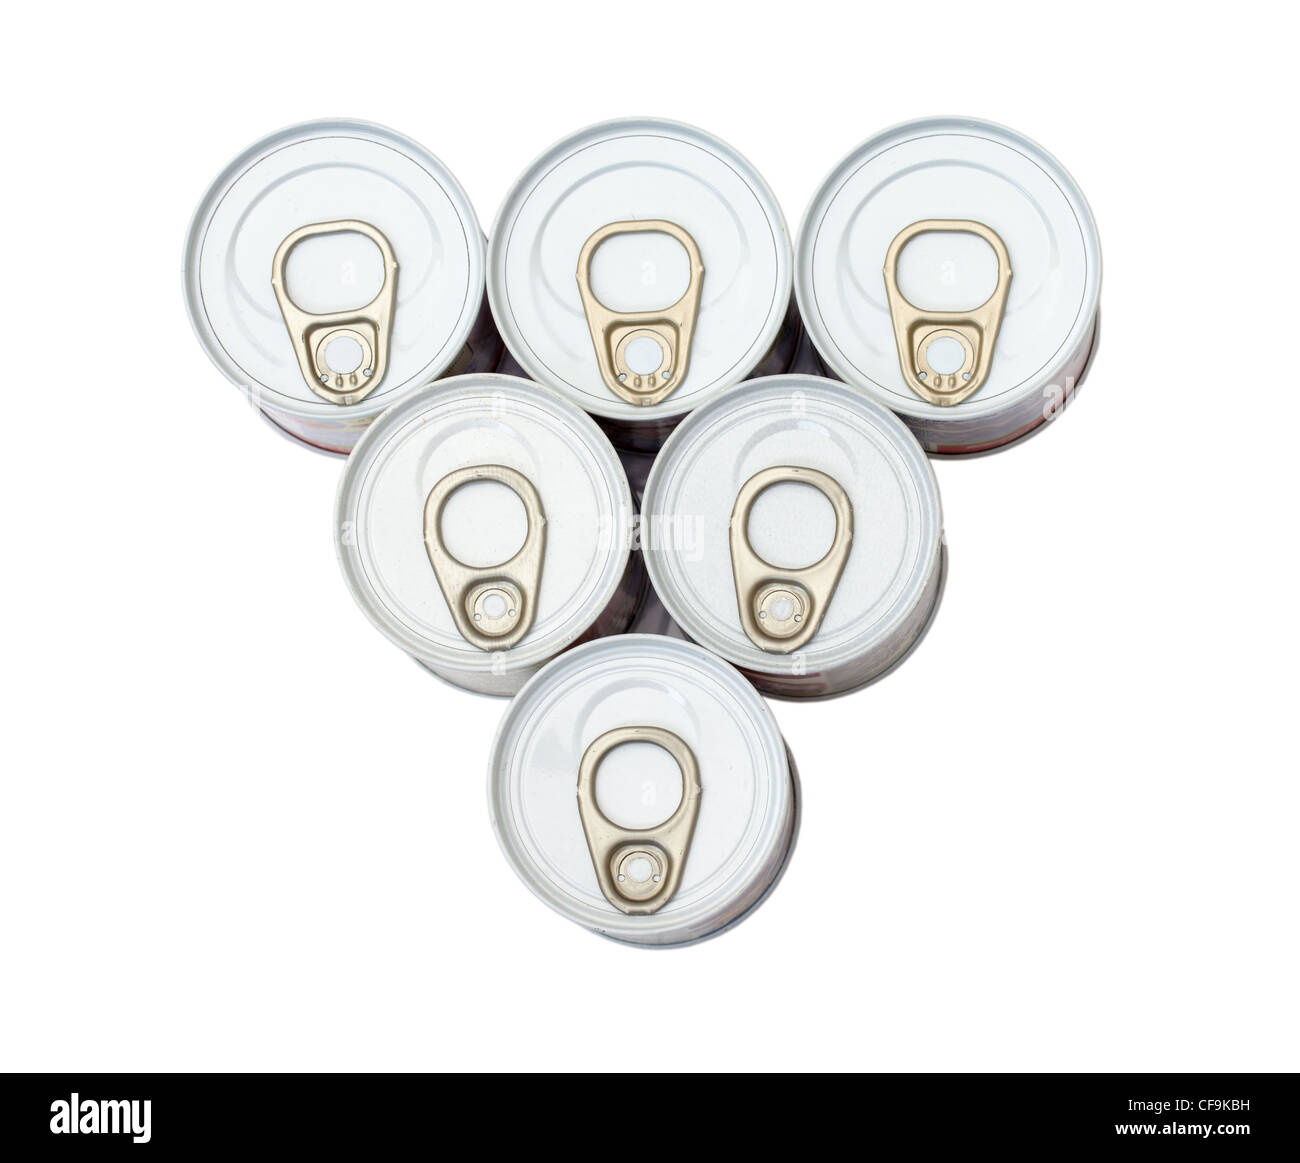 aluminum cans and ring pull, top view Stock Photo